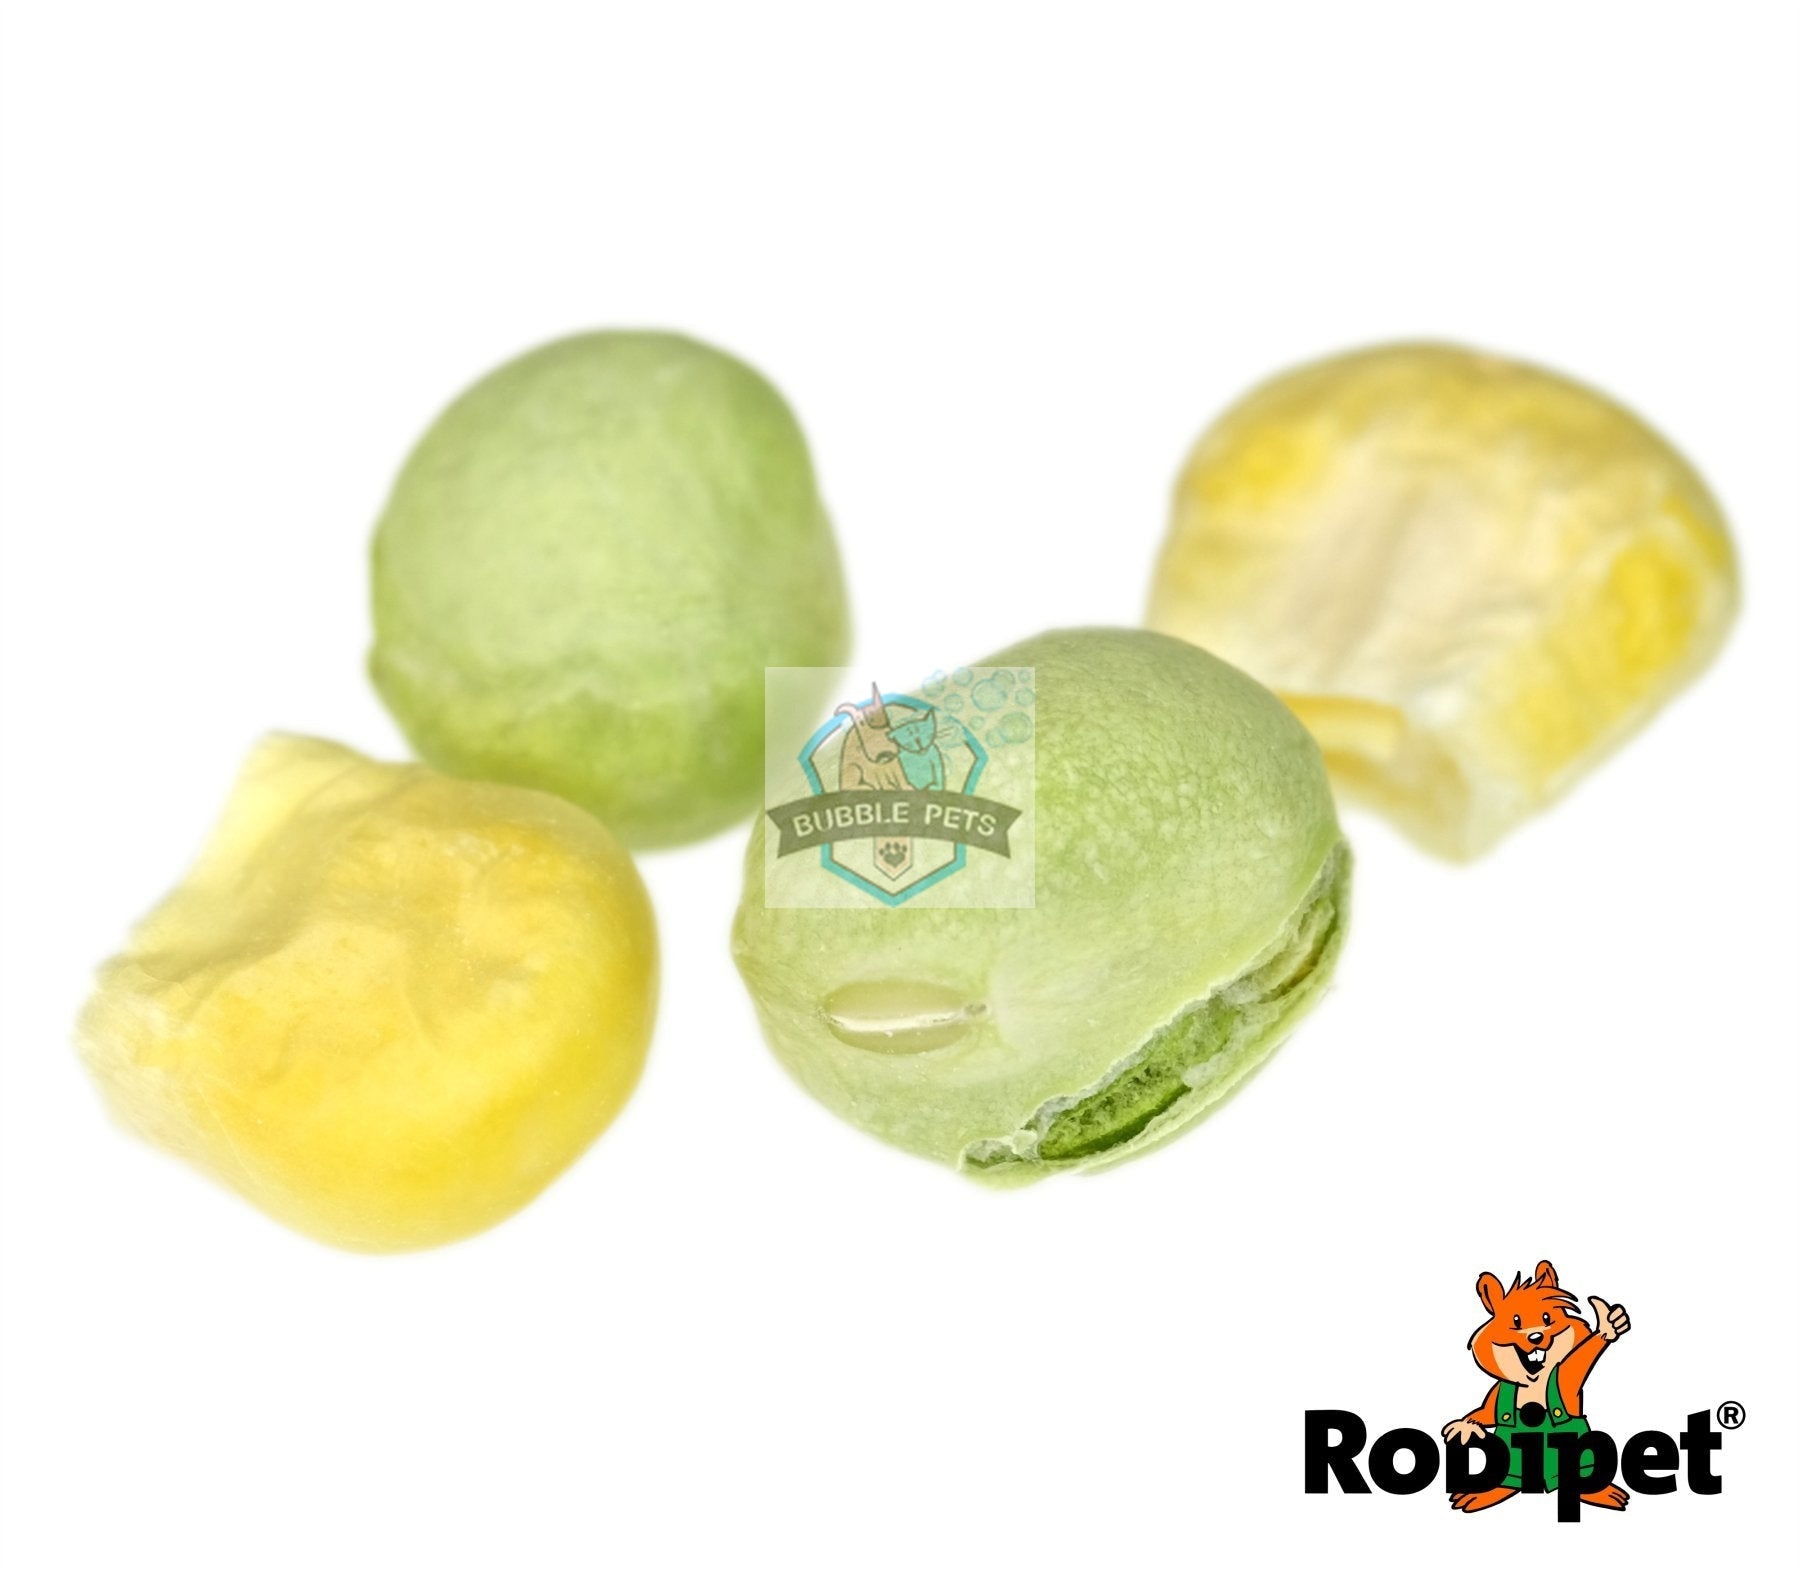 Rodipet Treat for Hamsters 70g